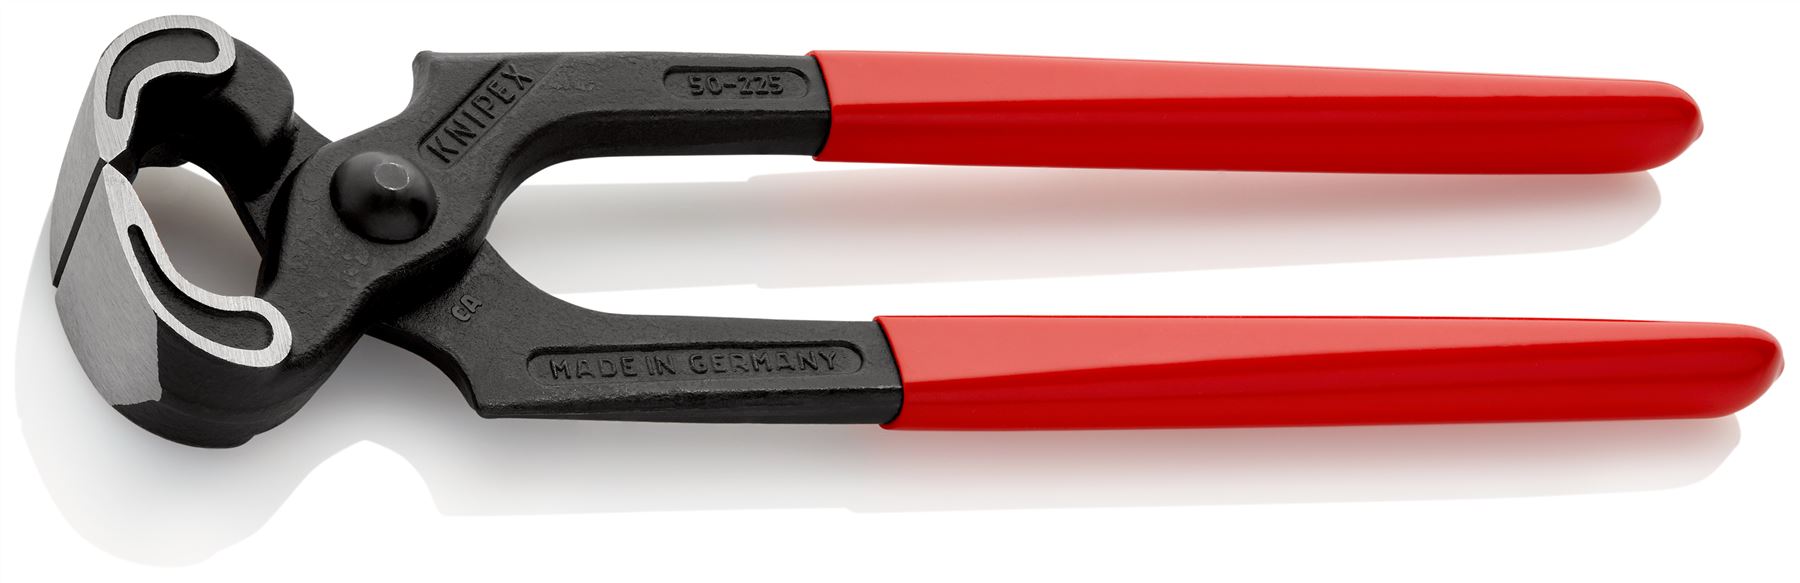 KNIPEX Carpenters Pincers 225mm Plastic Coated Handles 50 01 225